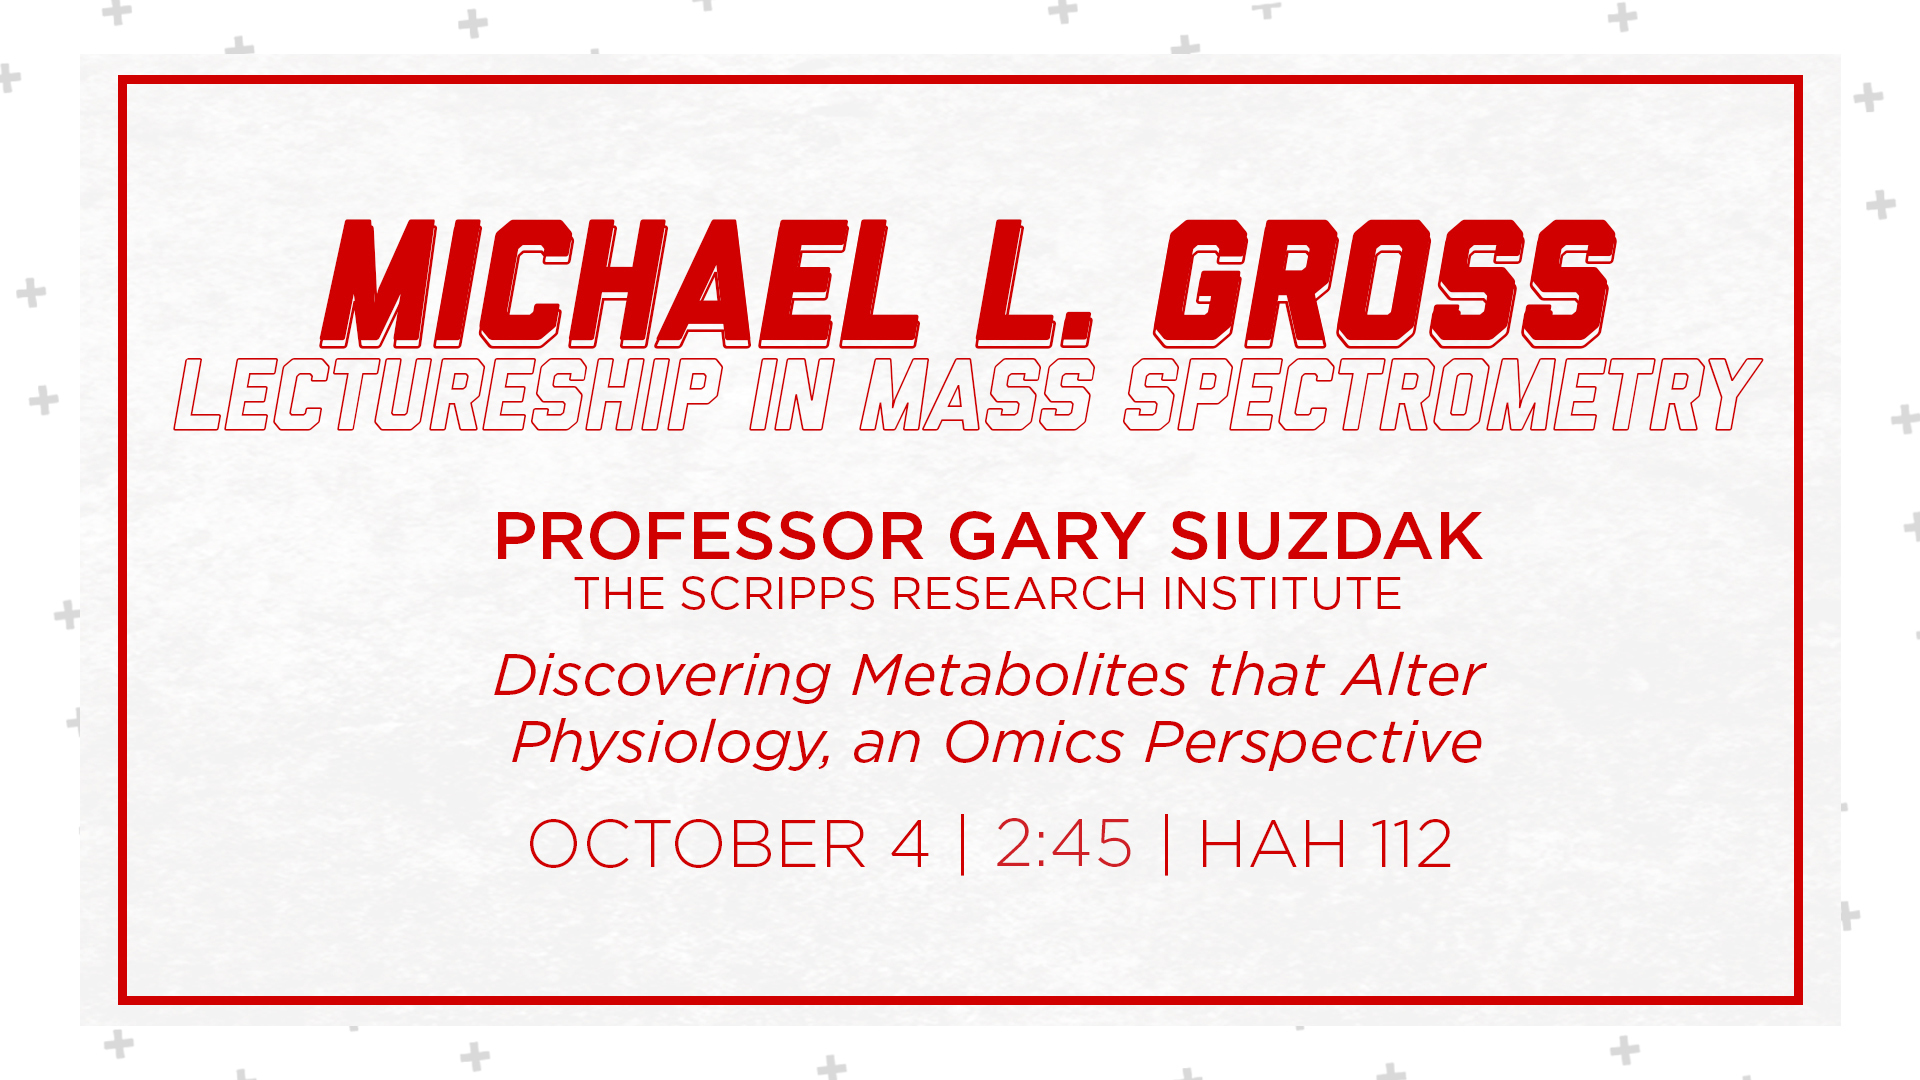 Siuzdak to Deliver the 2019 M.L. Gross Award Lecture